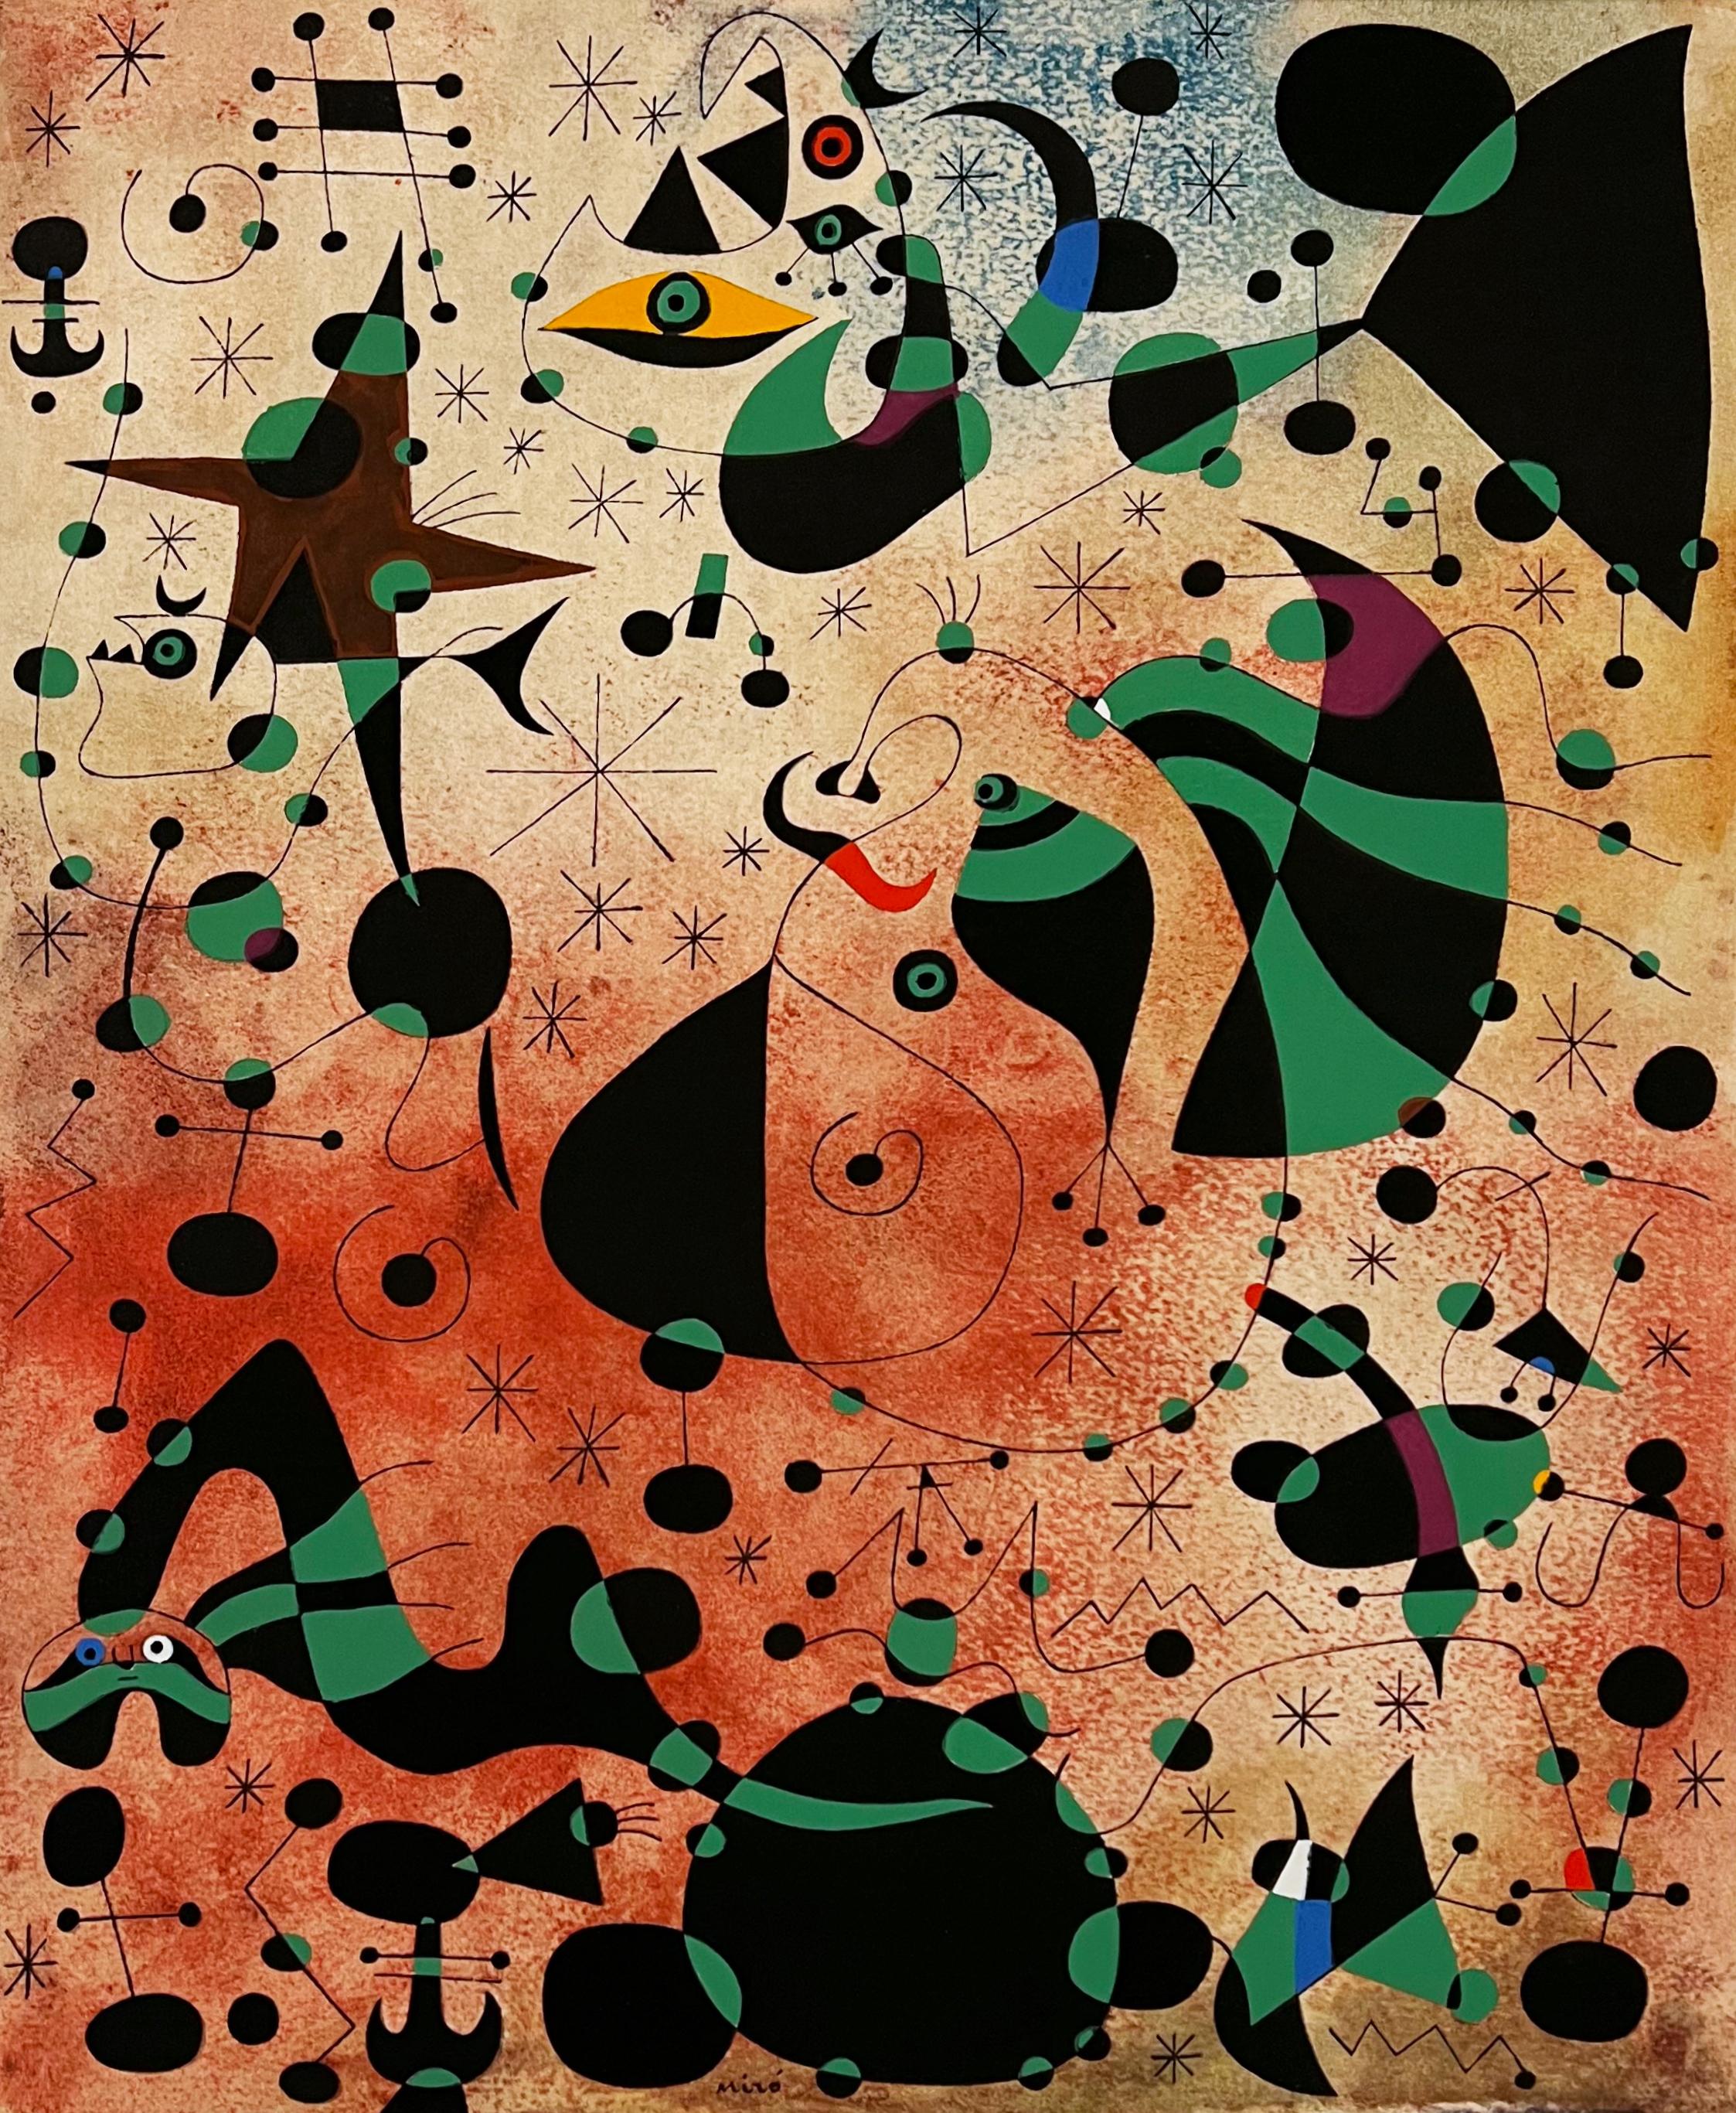 (after) Joan Miró Abstract Print - Joan Miro (after) Plate XXII from 1959 Constellations